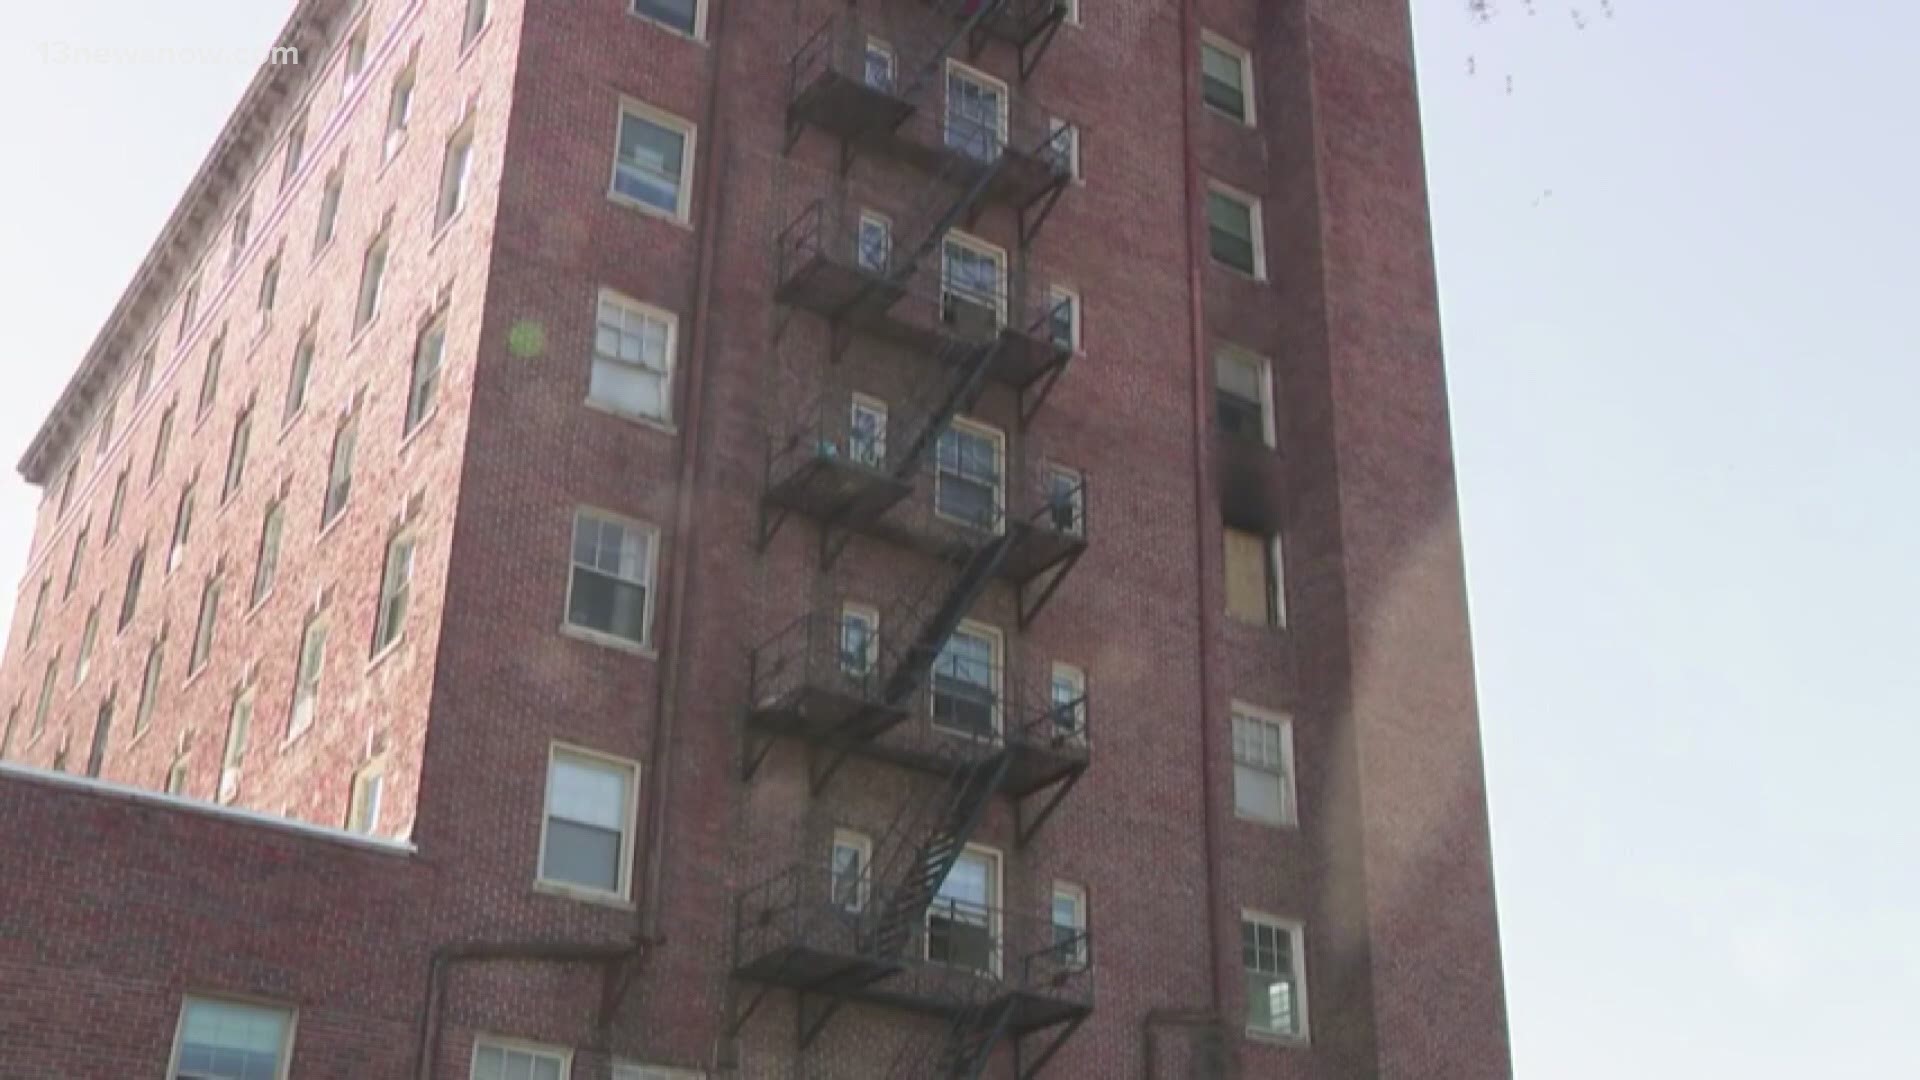 Residents are without a home after their apartment building caught fire, and now the building owner is threatening to not pay for their hotels.